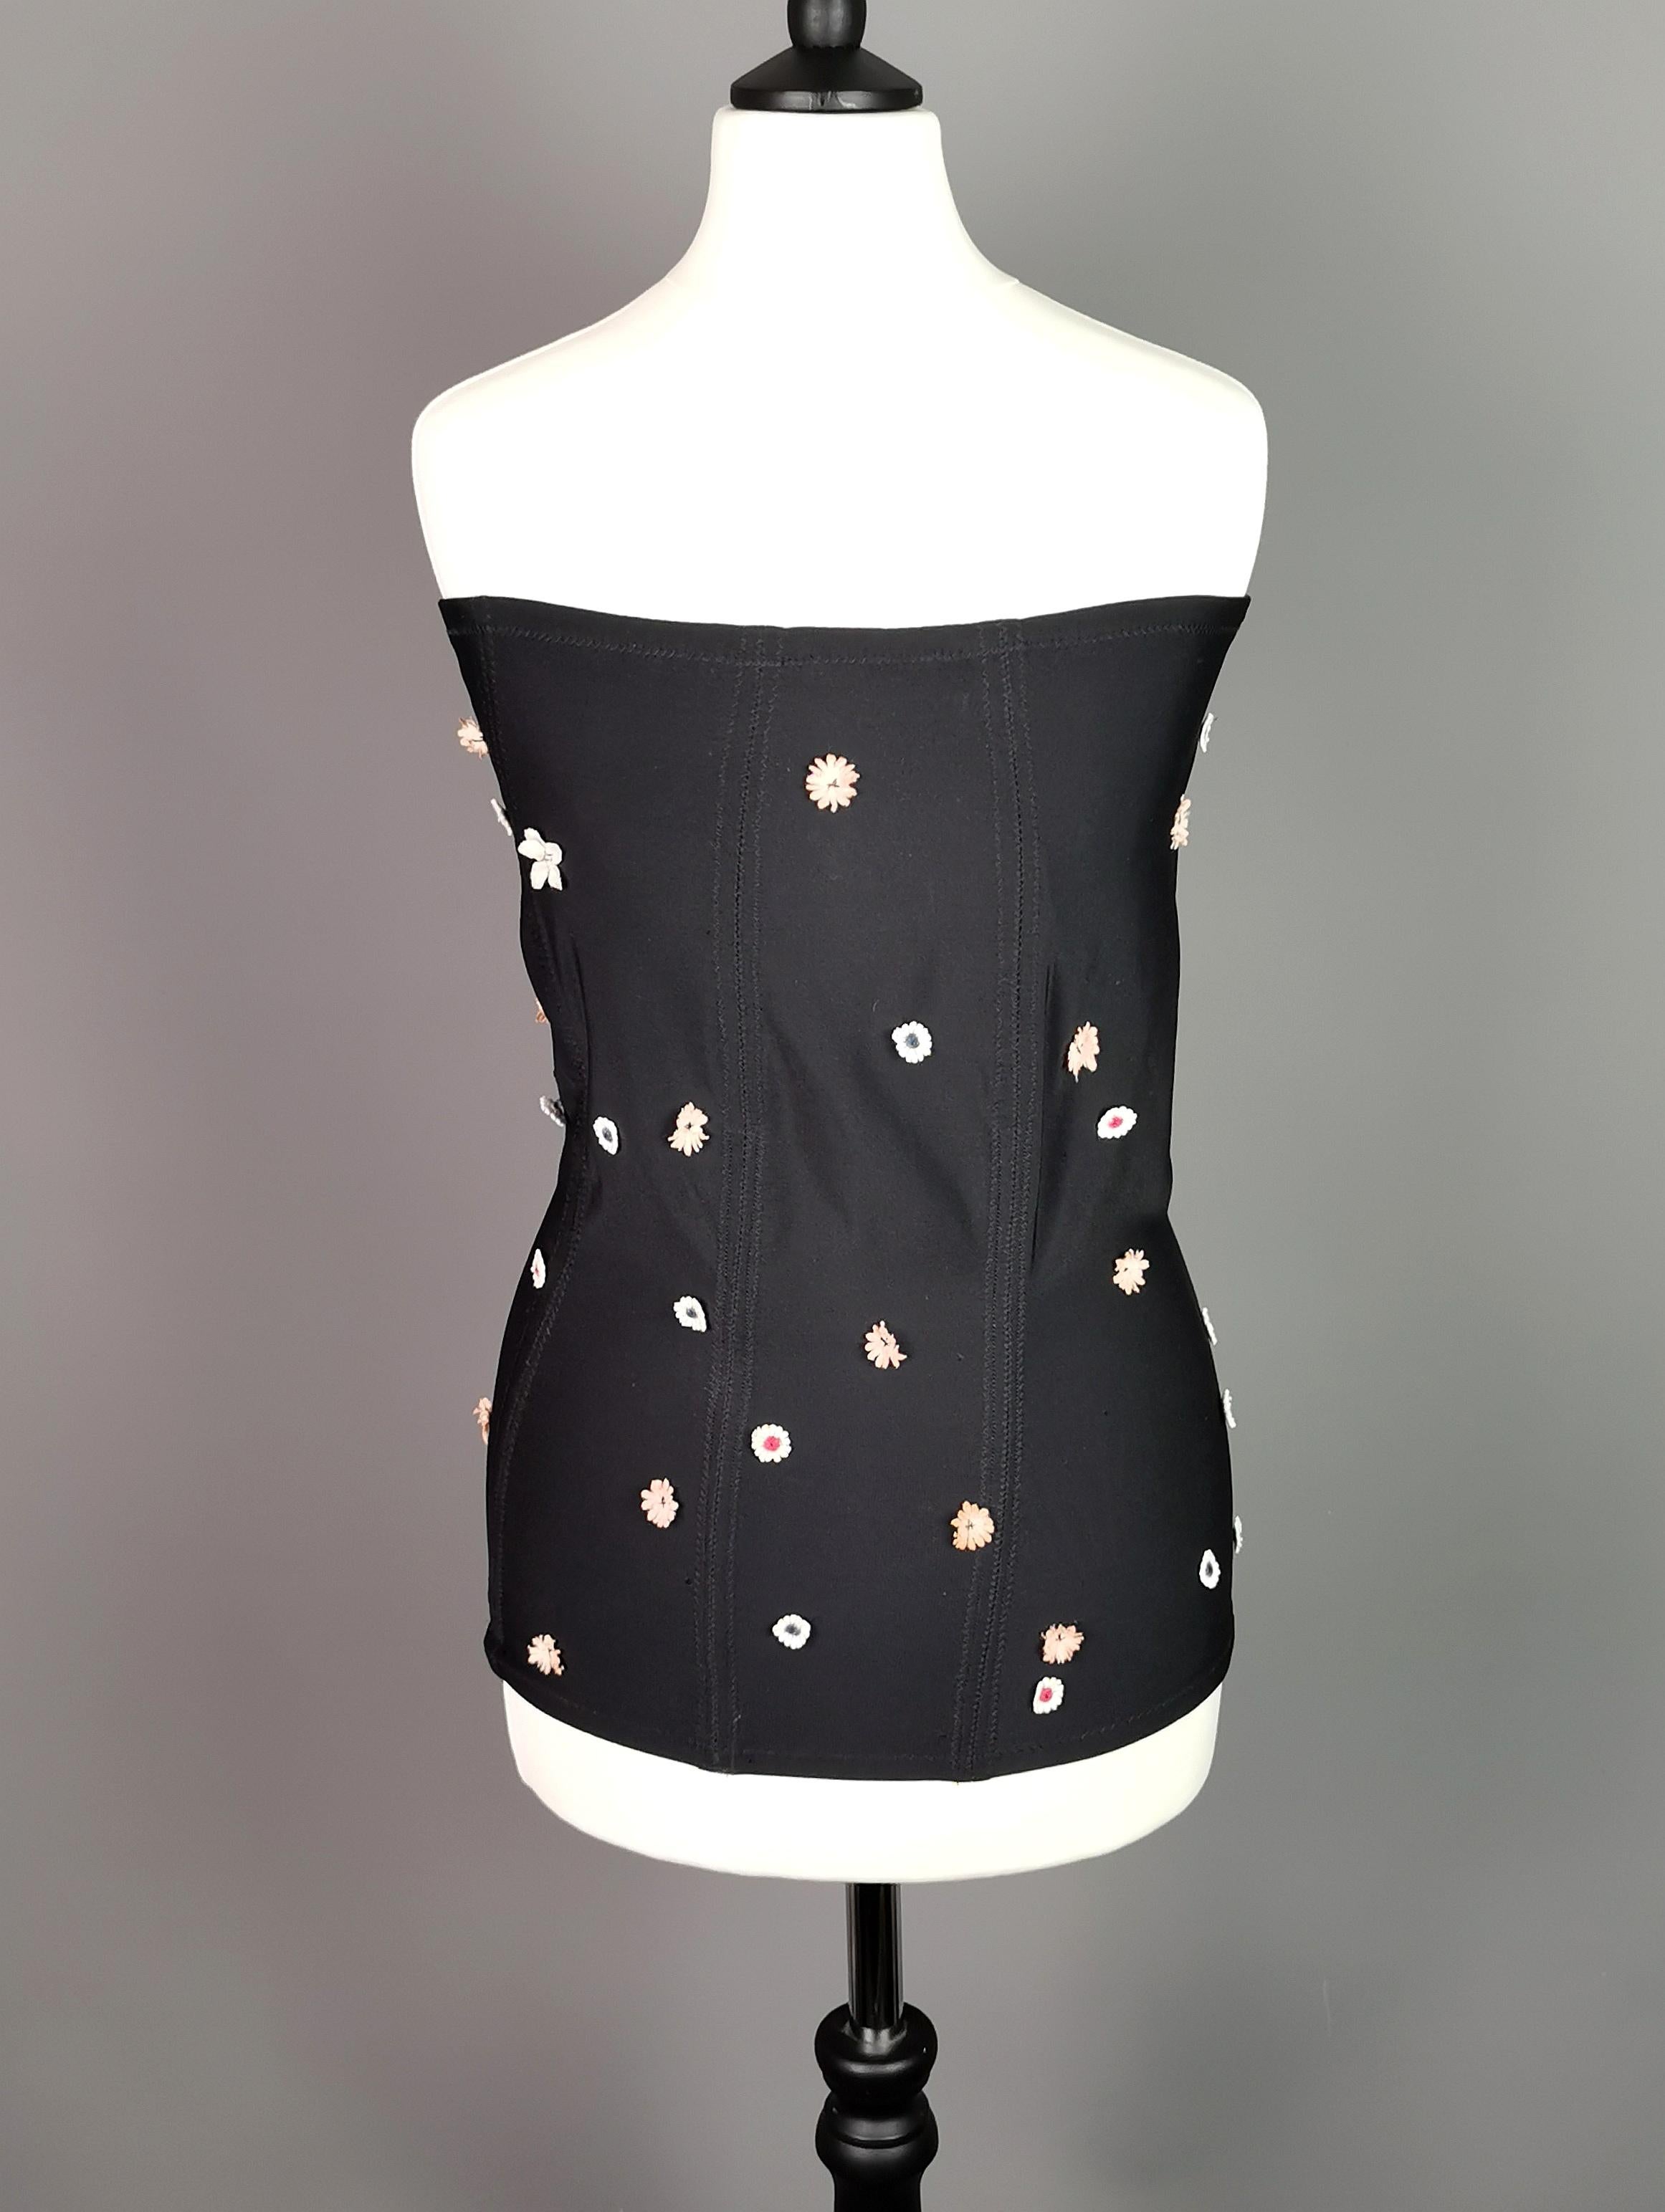 A gorgeous and unusual vintage Dolce and Gabbana floral corset or bandeau top.

It is a longer length top, very figure hugging and tight fitting it is black with a ditsy floral embellished design.

Tiny little flowers are spread across the garment